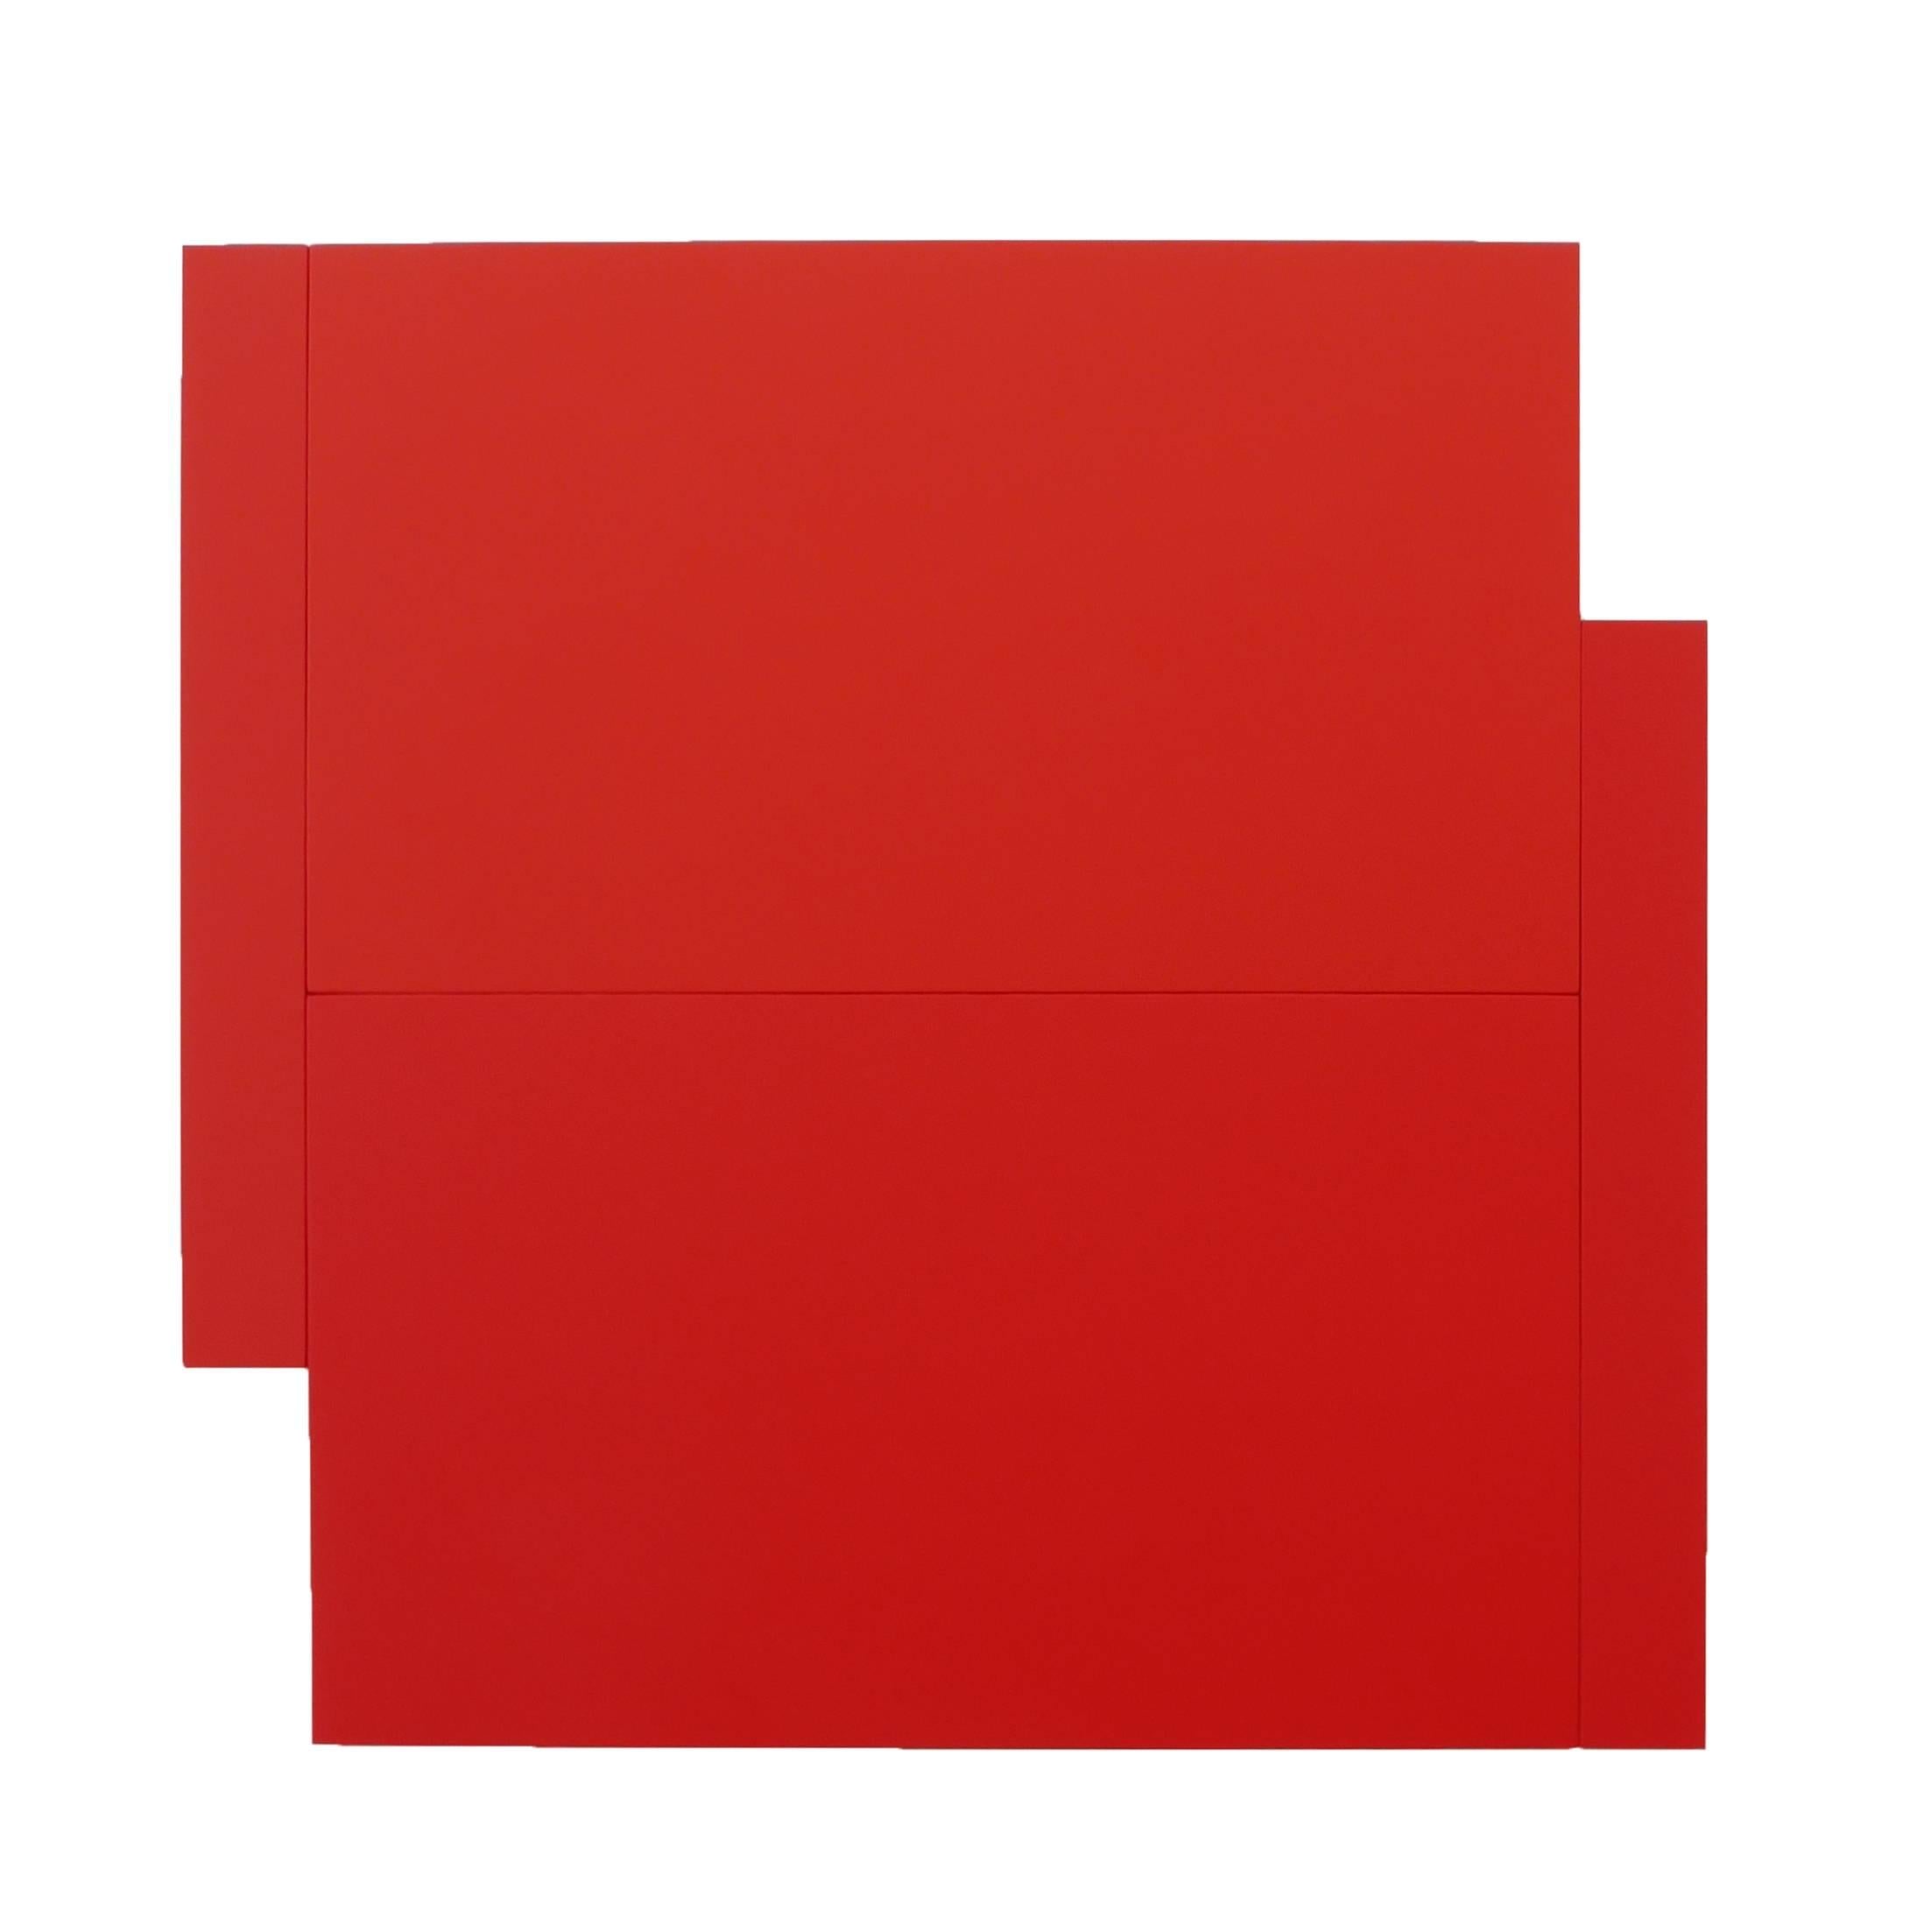 Scot Heywood Abstract Painting – Shift - Red on Red